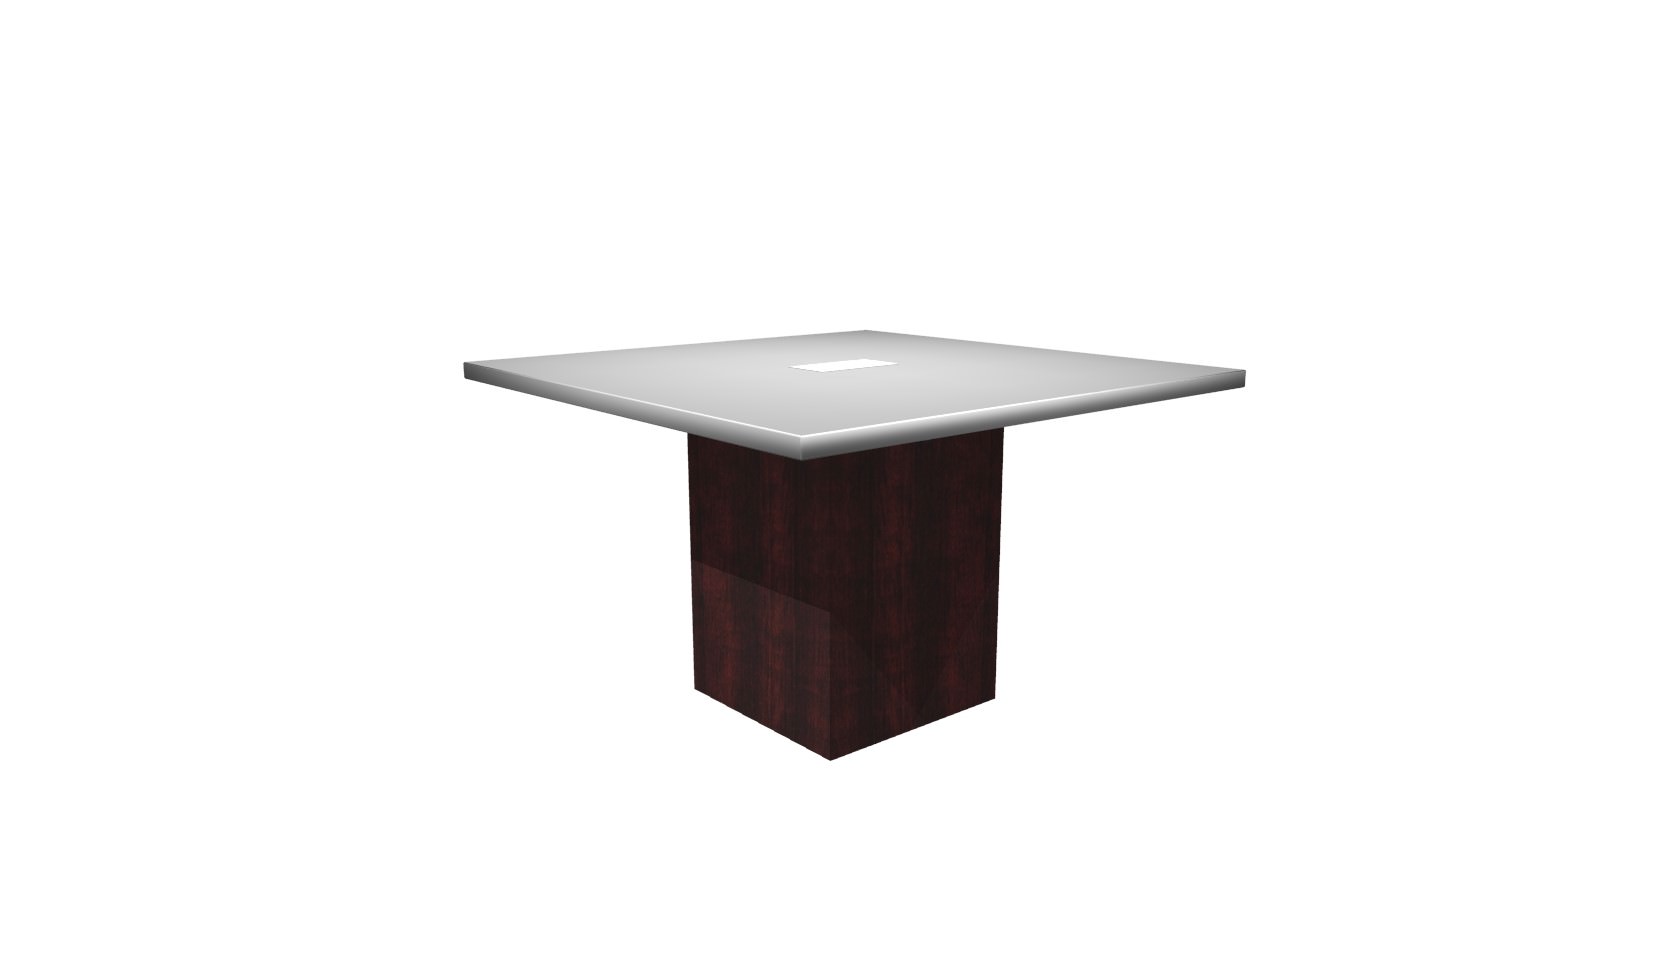 48 Inch Square Conference Table - (White / Mahogany)